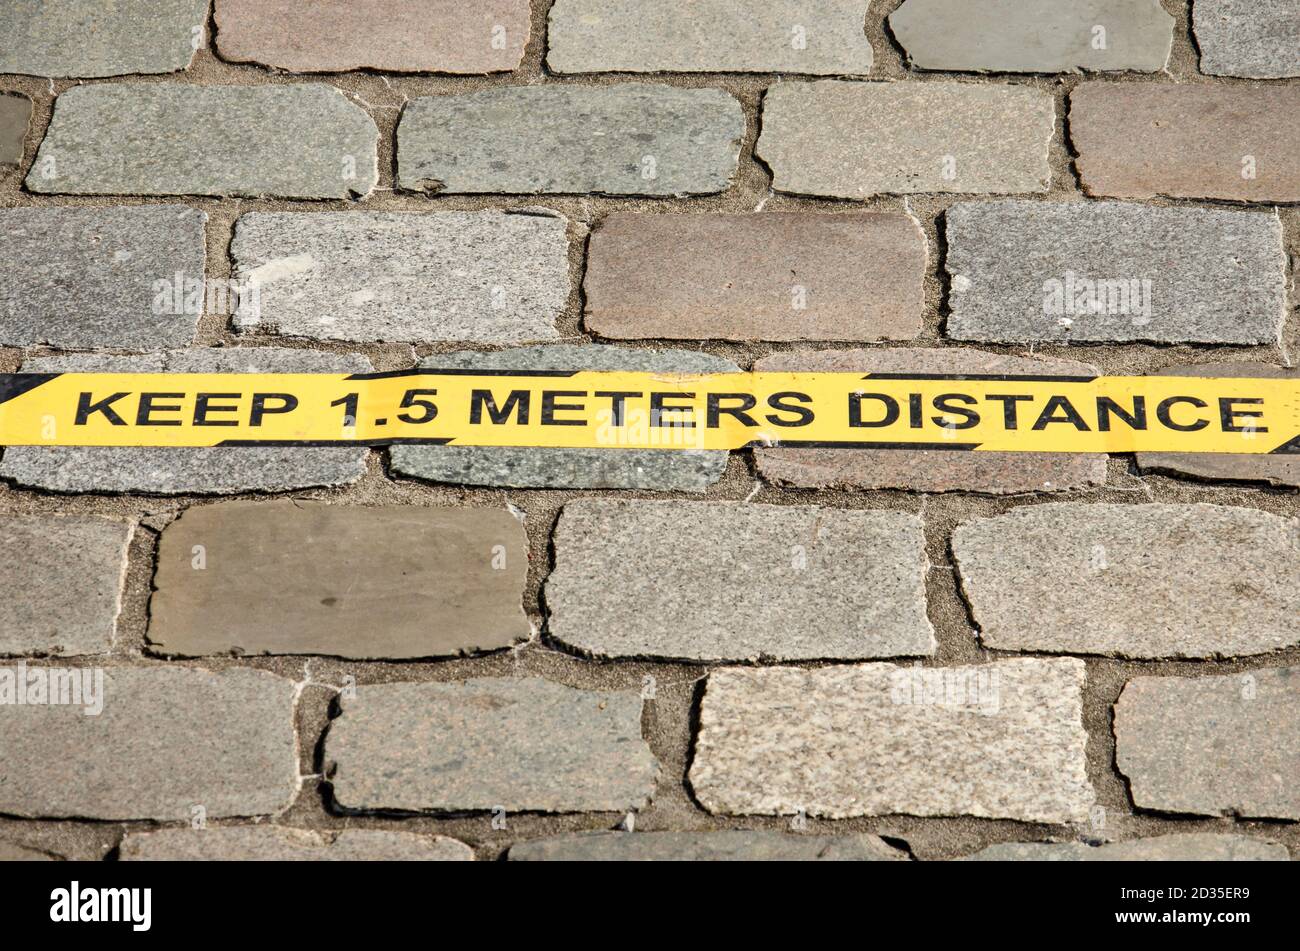 Delft, The Netherlands, October 4, 2020: yellow strips on pavement at the university campus with advice to keep 1.5 metres distance in order to preven Stock Photo